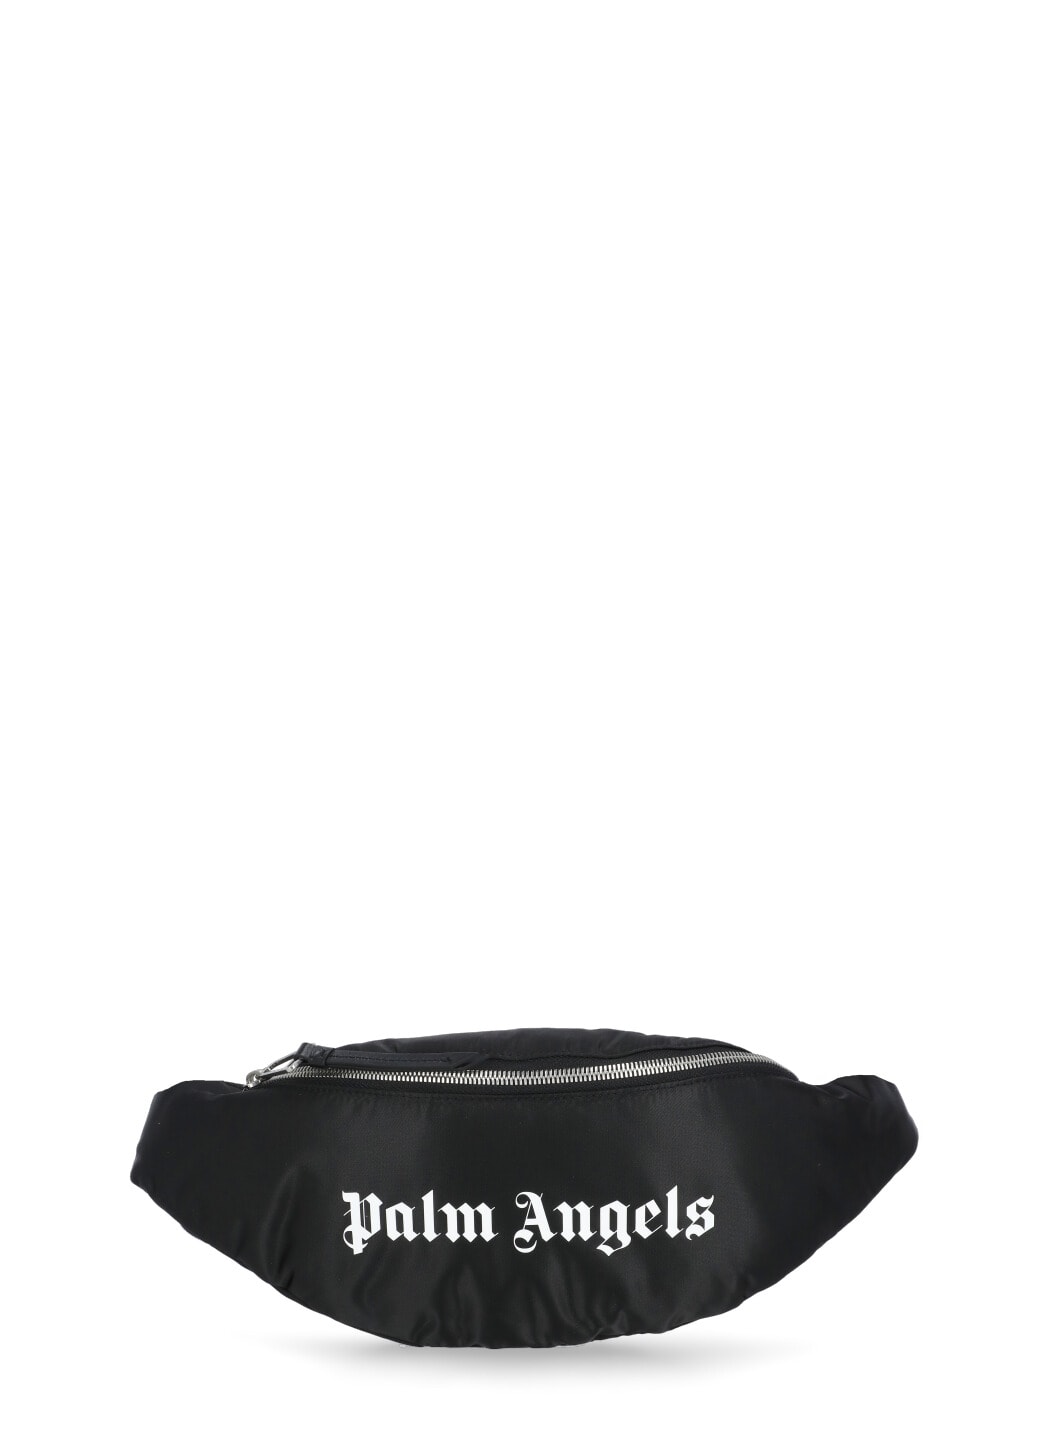 Palm Angels Logoed Pouch